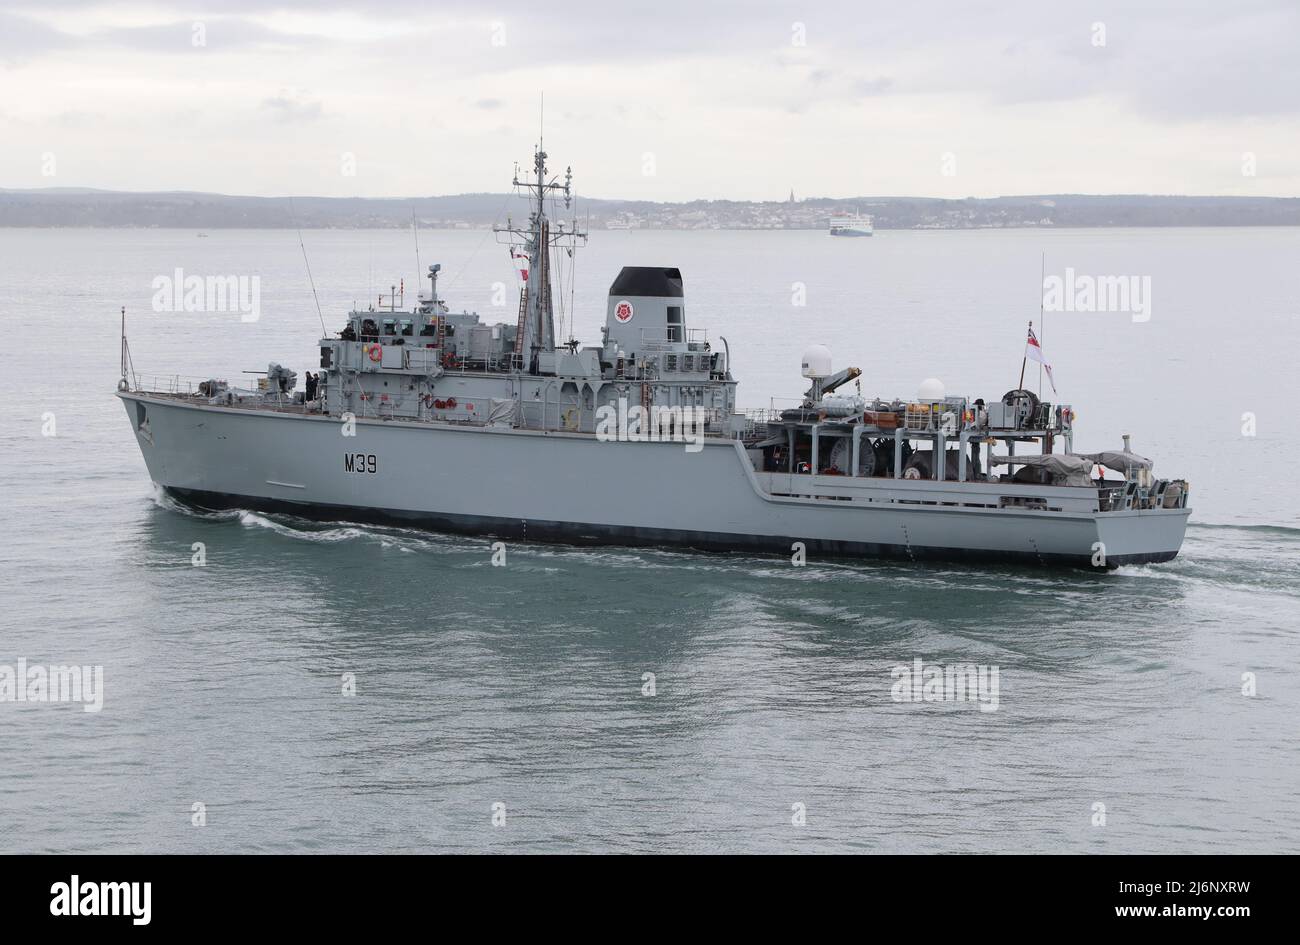 The Royal Navy Hunt class mine counter measures vessel HMS HURWORTH leaving harbour Stock Photo